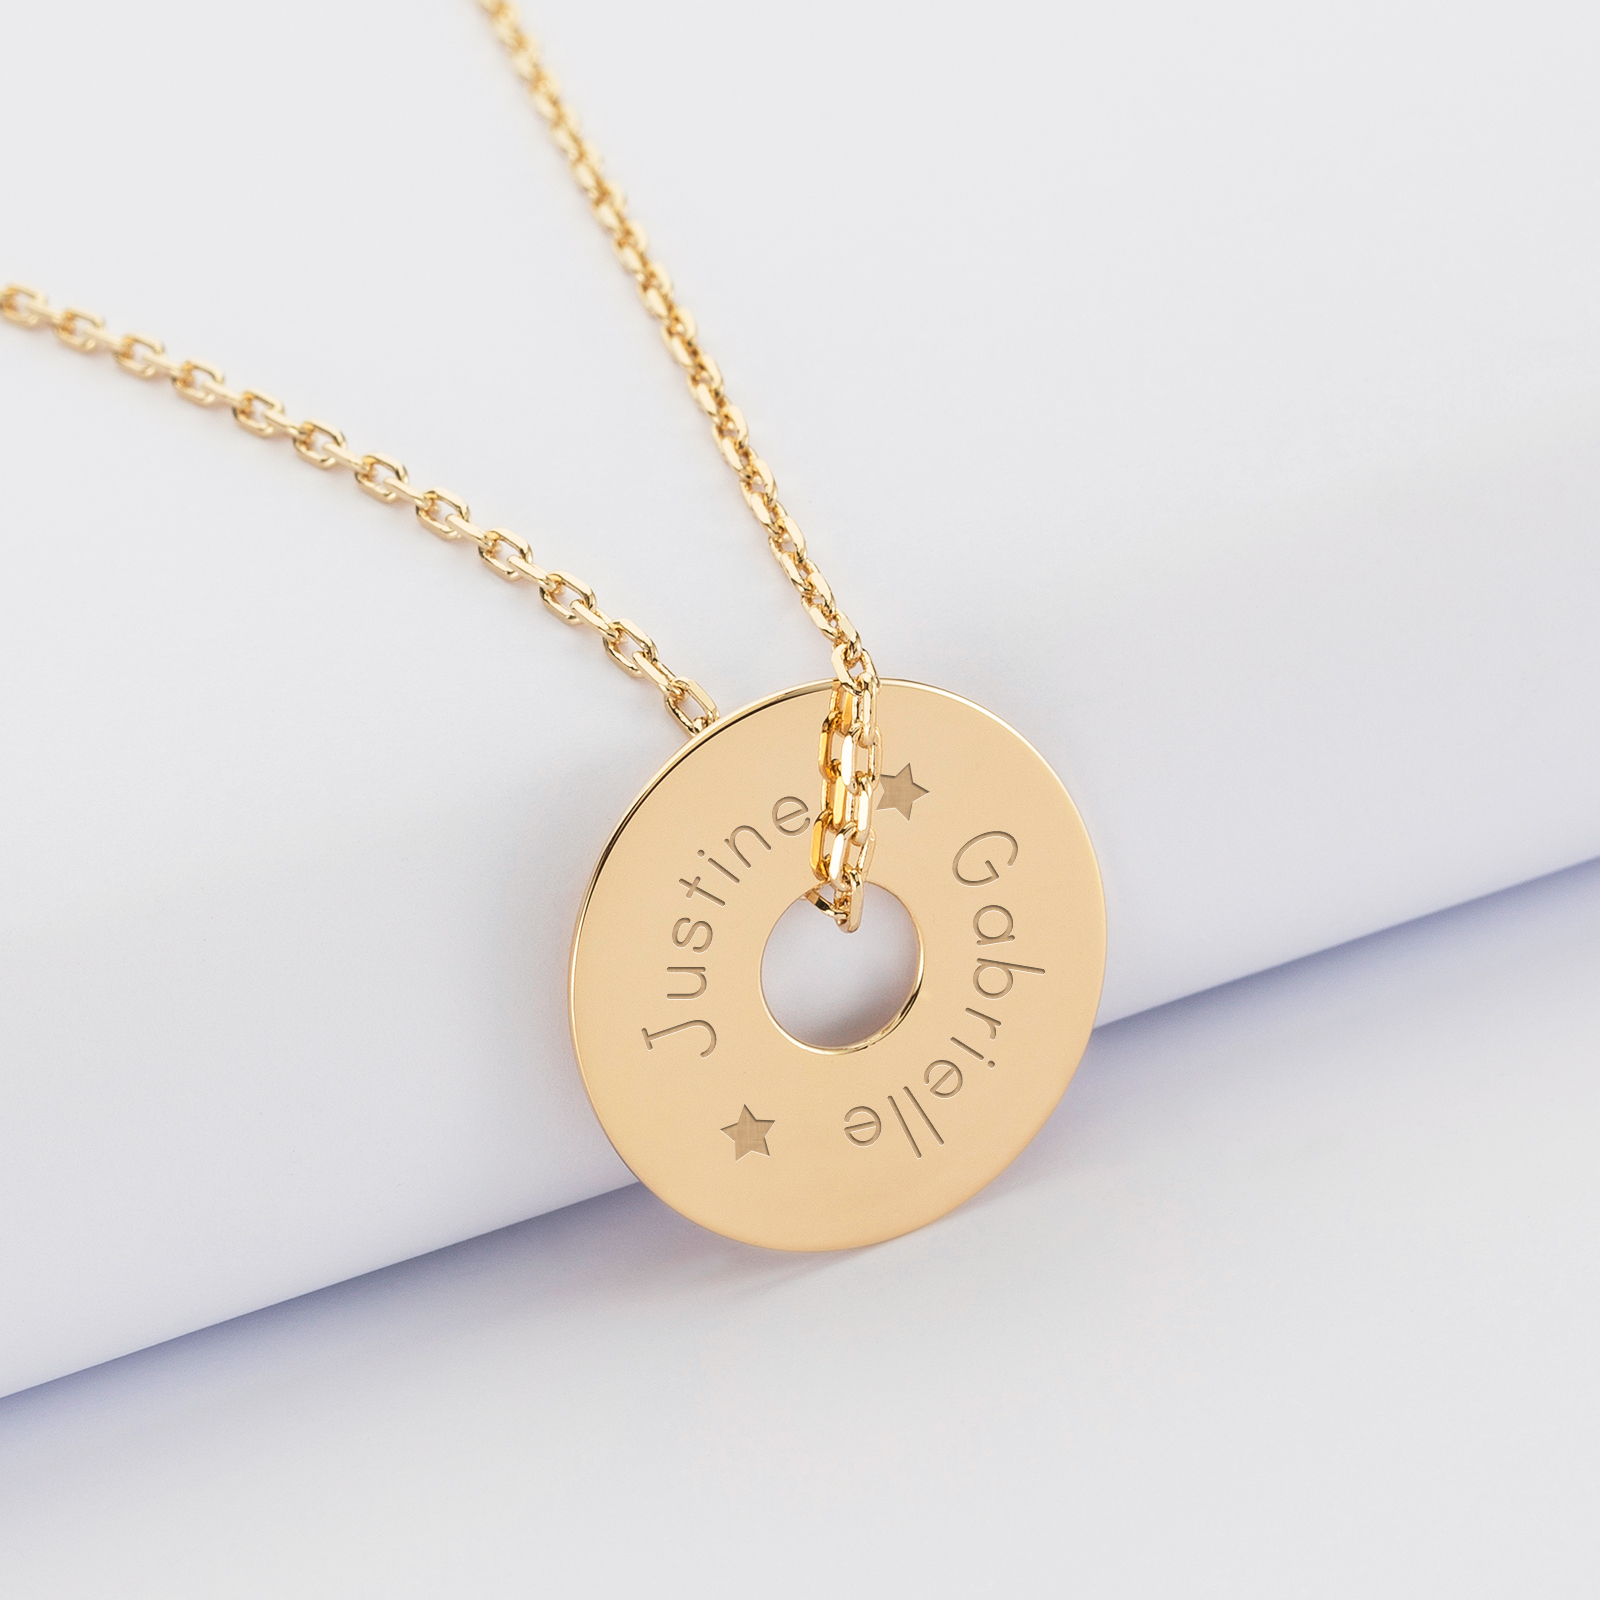 Personalised engraved gold-plated target medallion pendant 20mm - 1